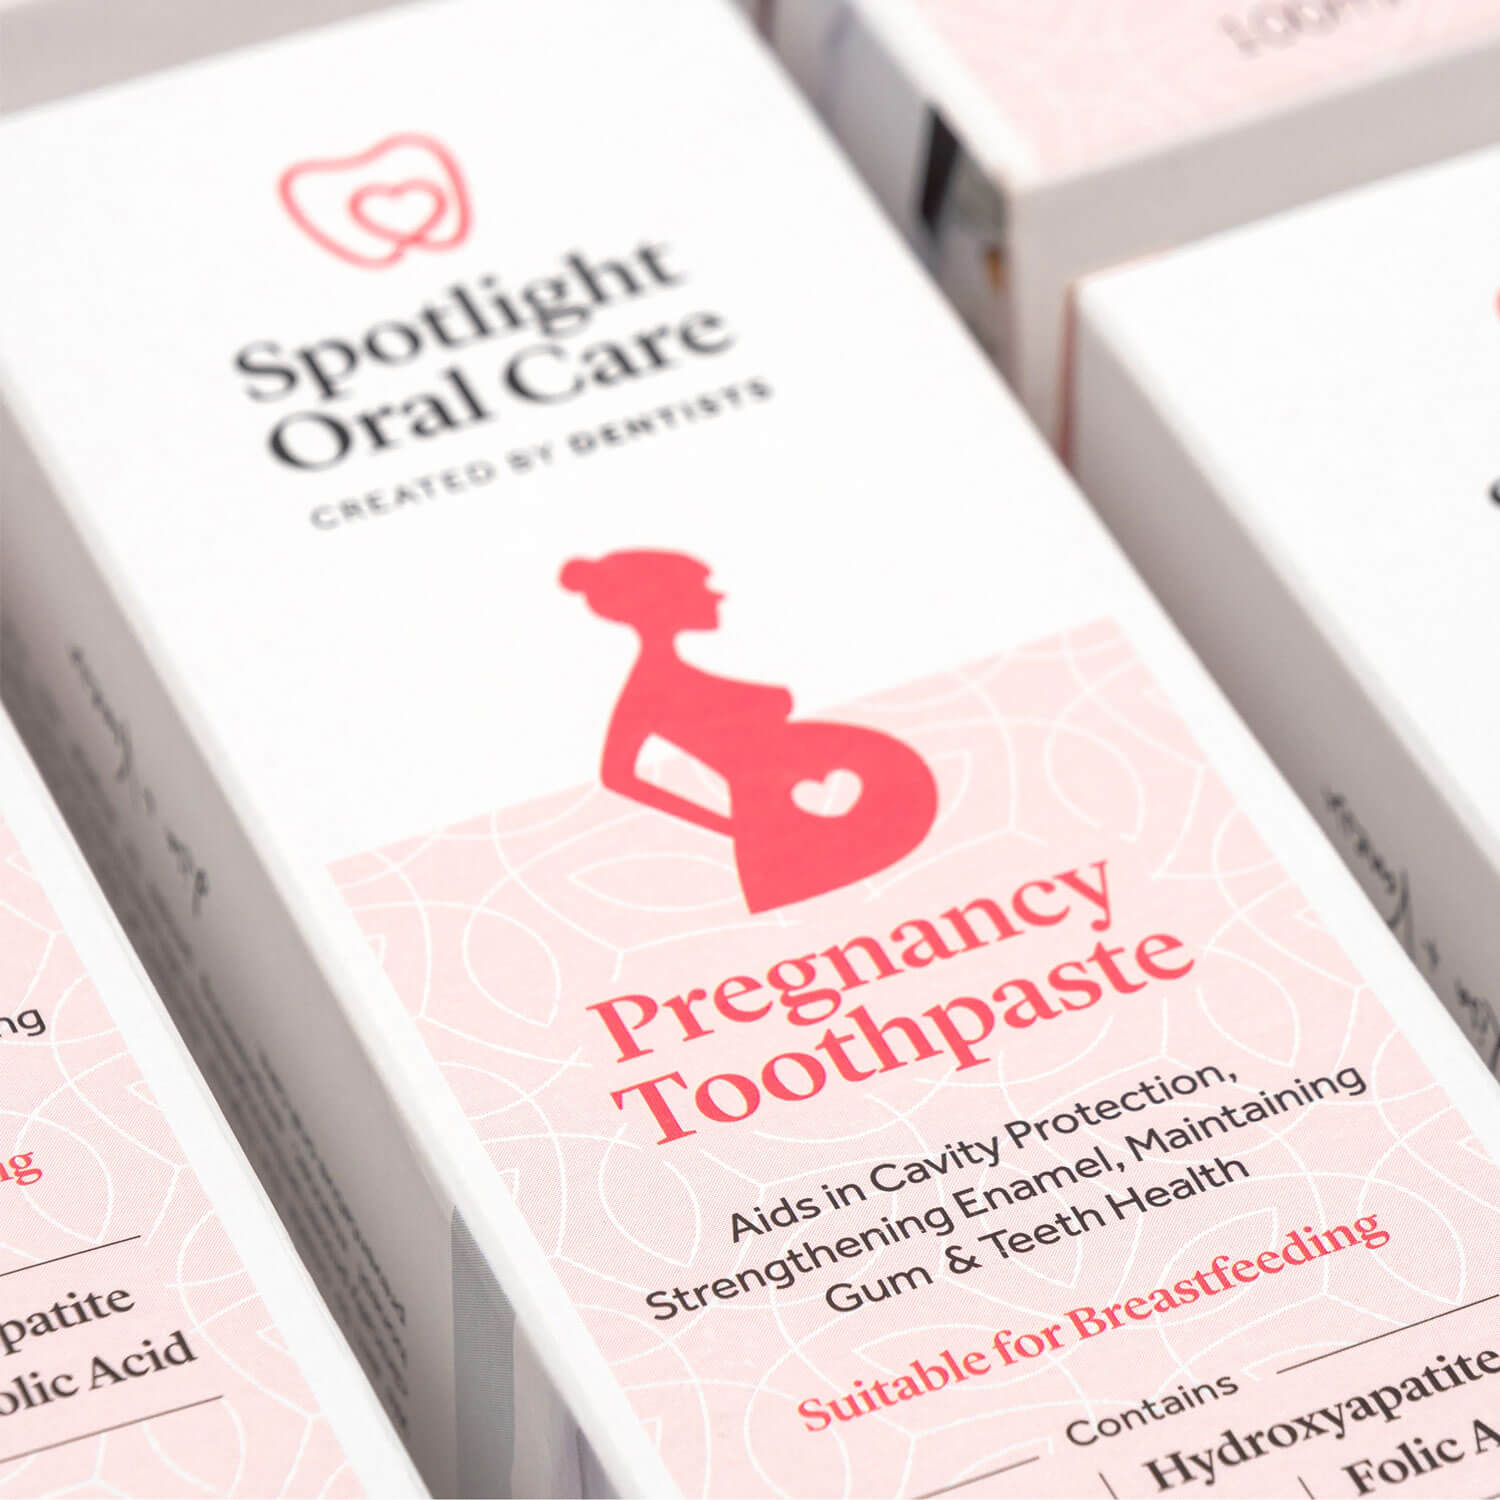 Spotlight Oral Care Pregnancy Toothpaste 5 Shaws Department Stores